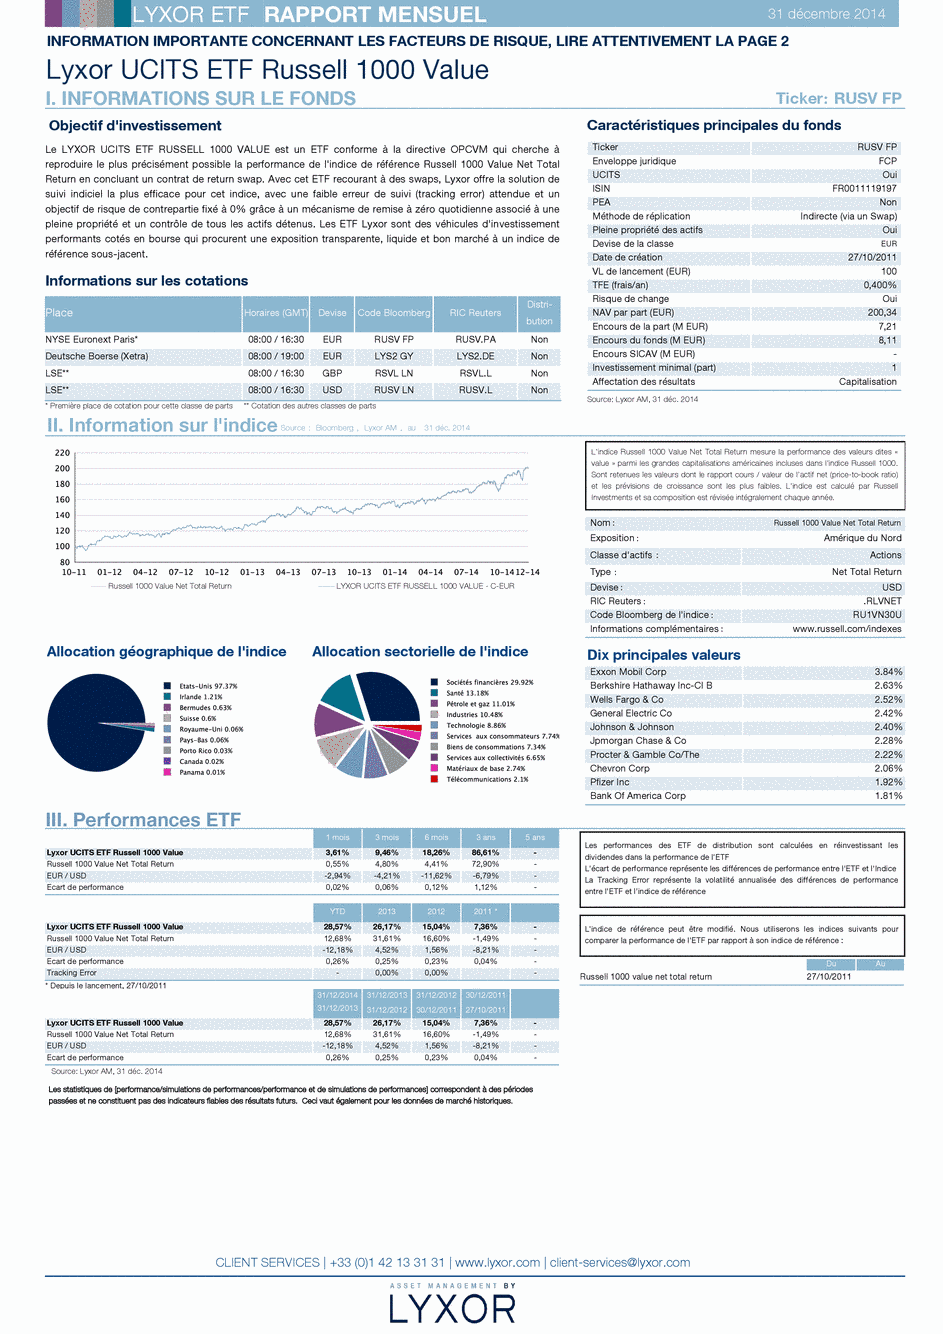 Reporting LYXOR UCITS ETF RUSSELL 1000 VALUE PART C-EUR - 31/12/2014 - Français